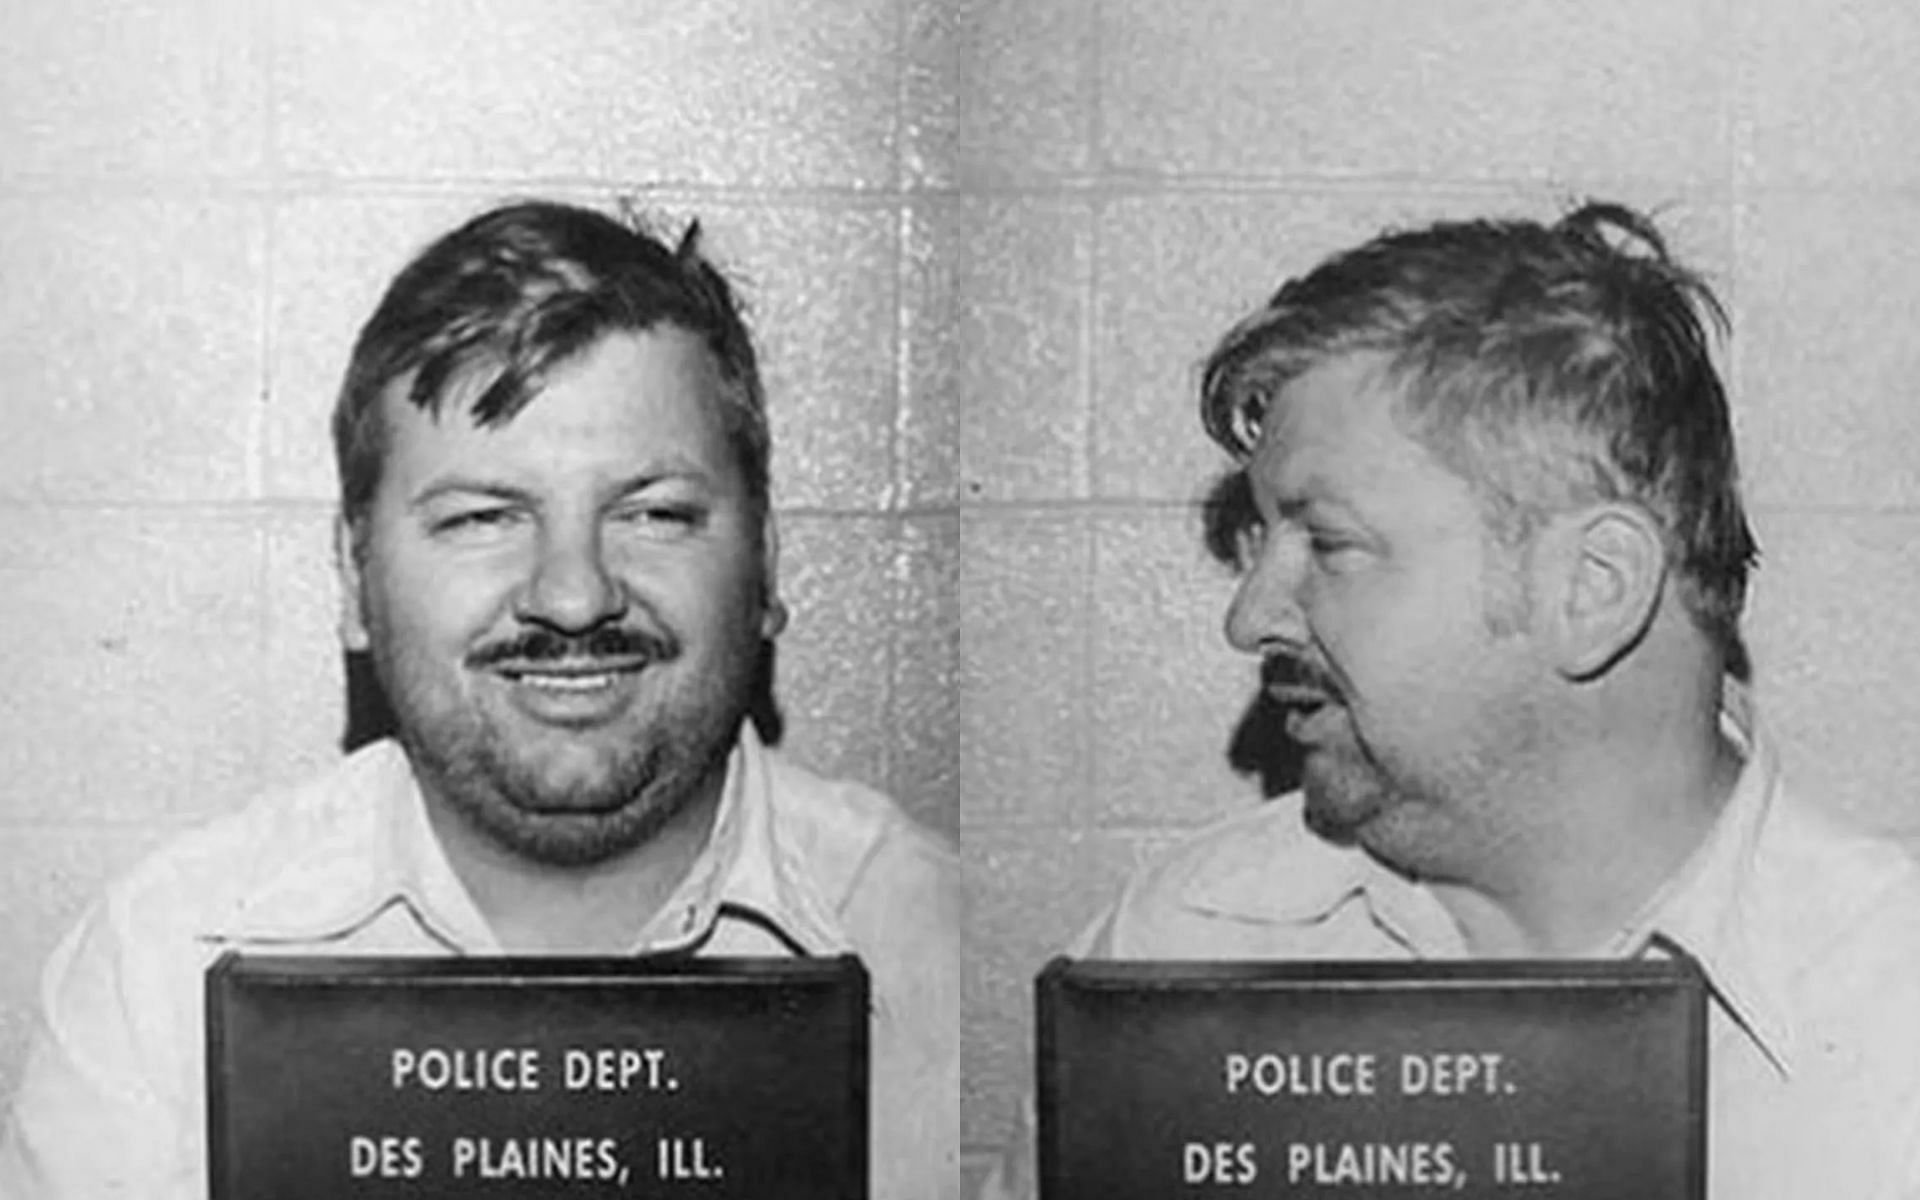 Conversations with a Killer: The John Wayne Gacy Tapes will be released on Netflix on April 20, 2022. (Image via Getty Images)